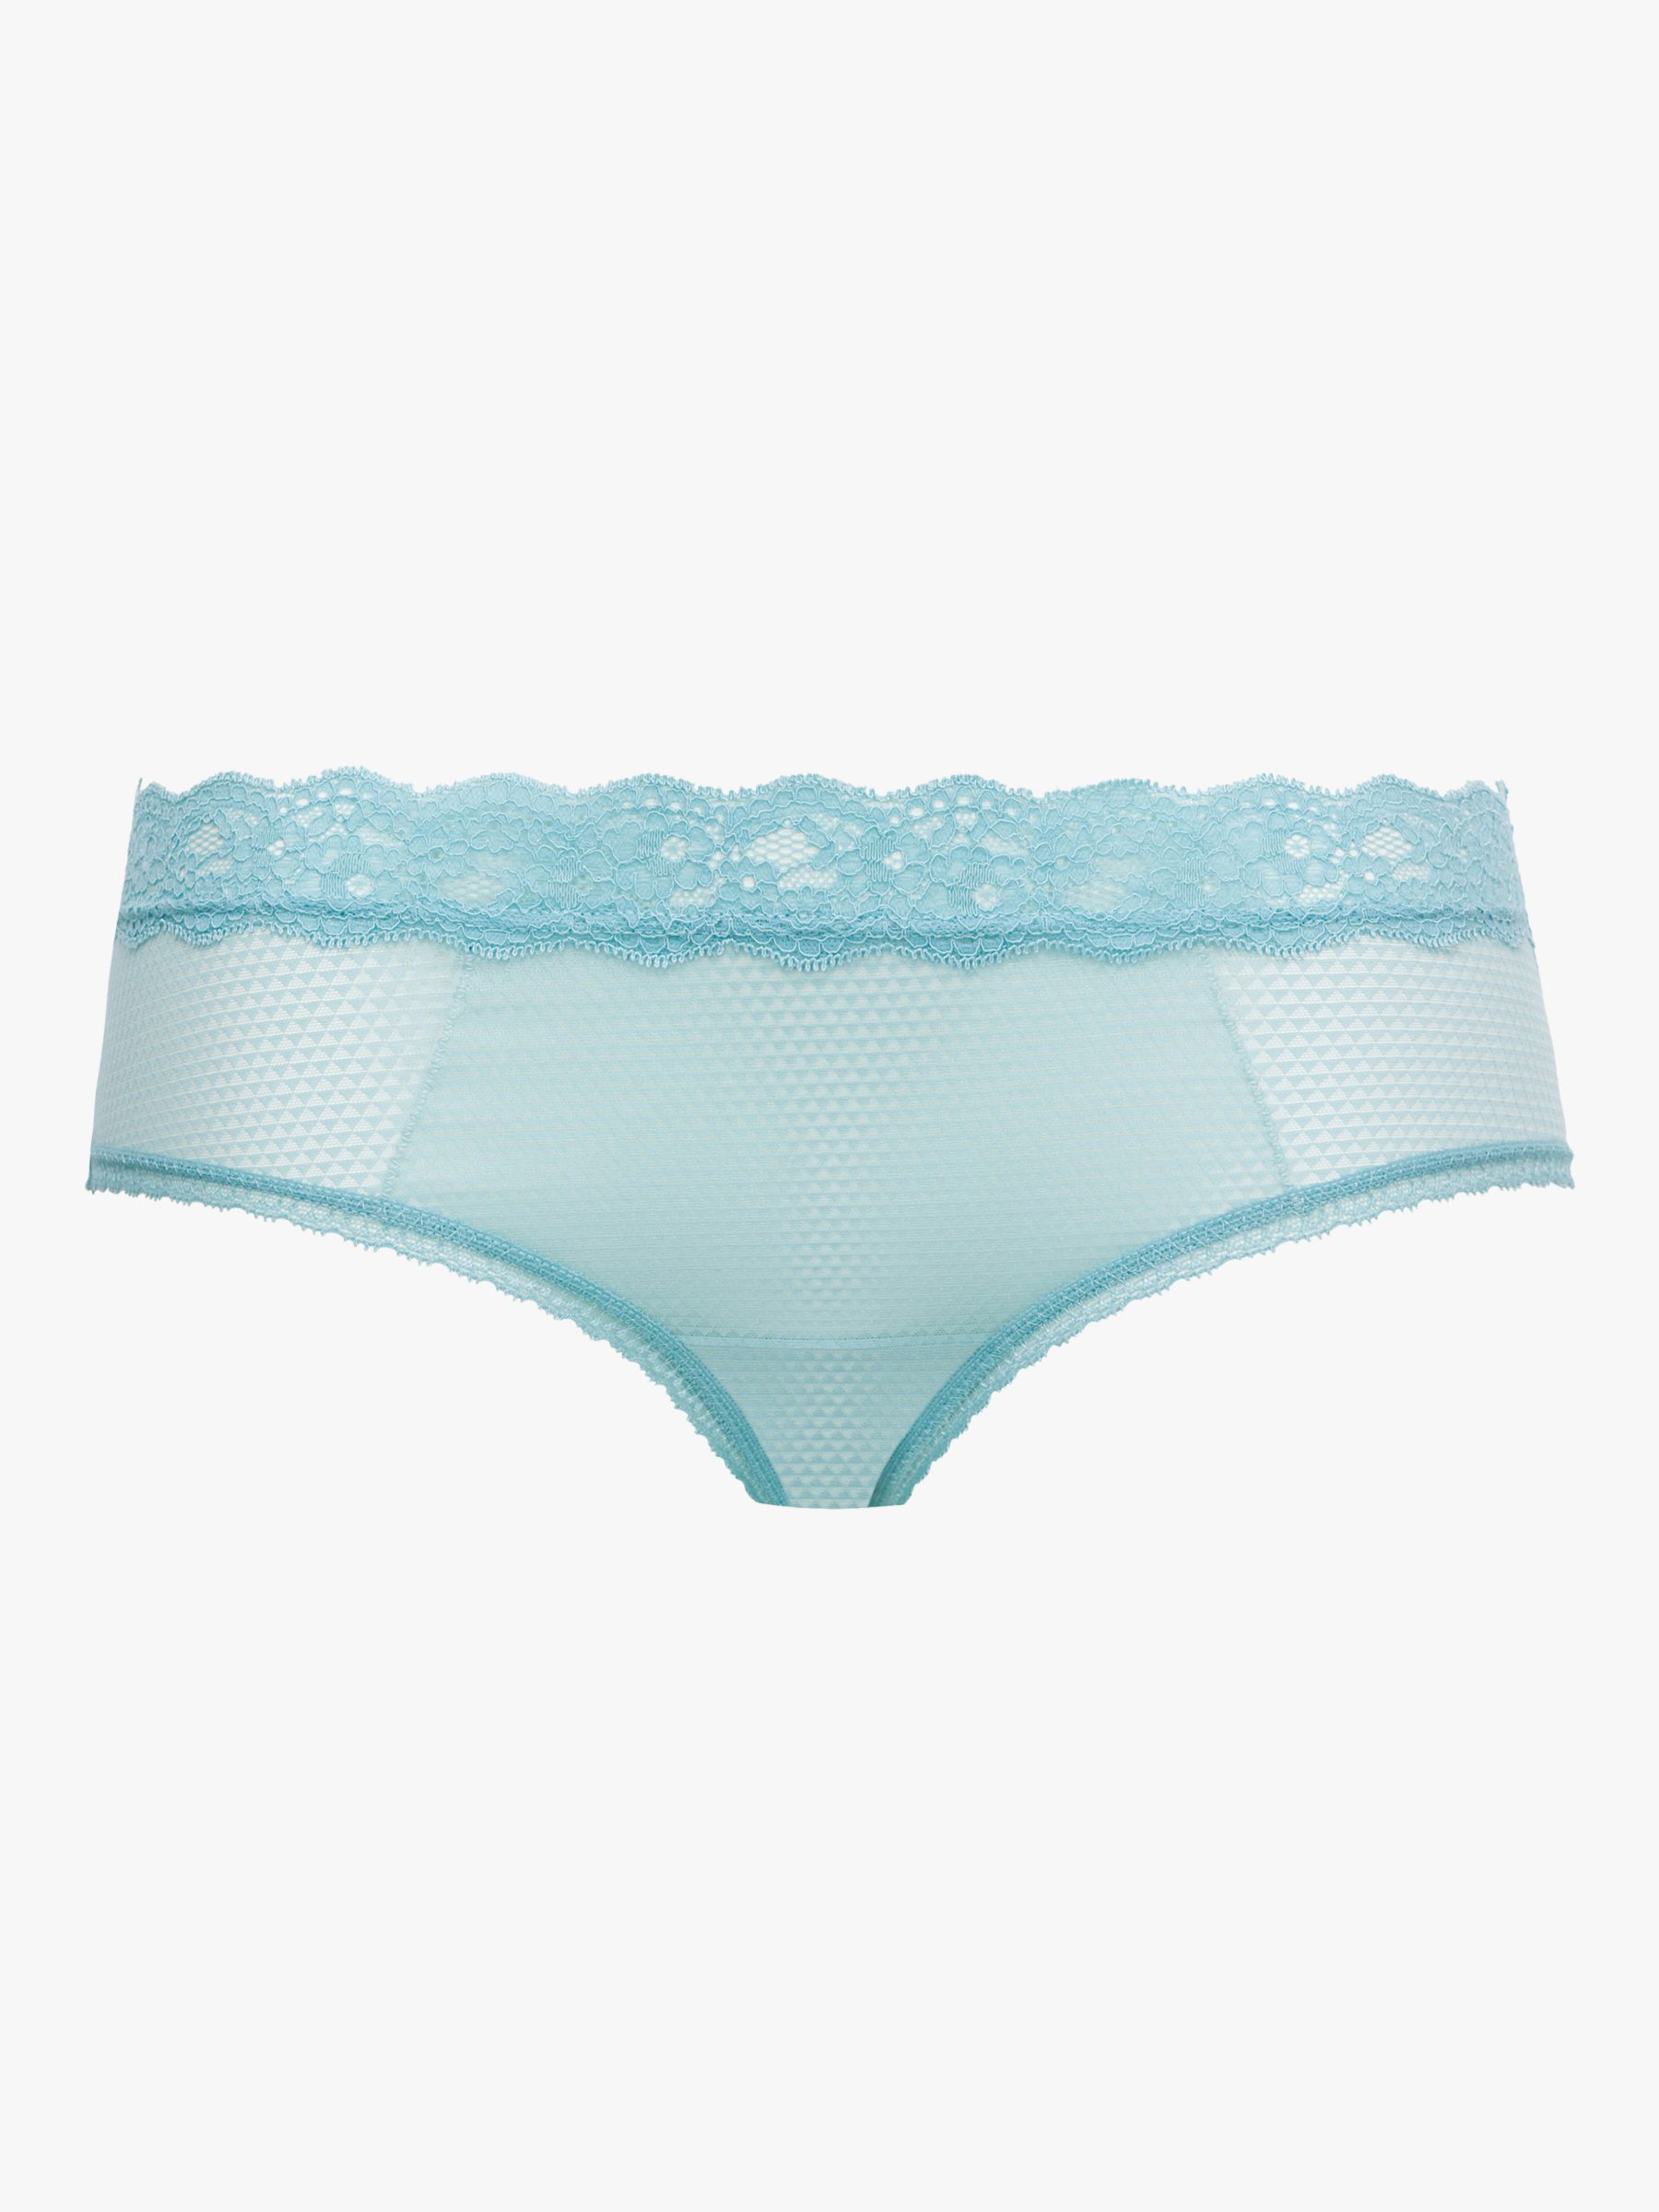 Passionata Brooklyn Hipster Knickers, Ice Blue